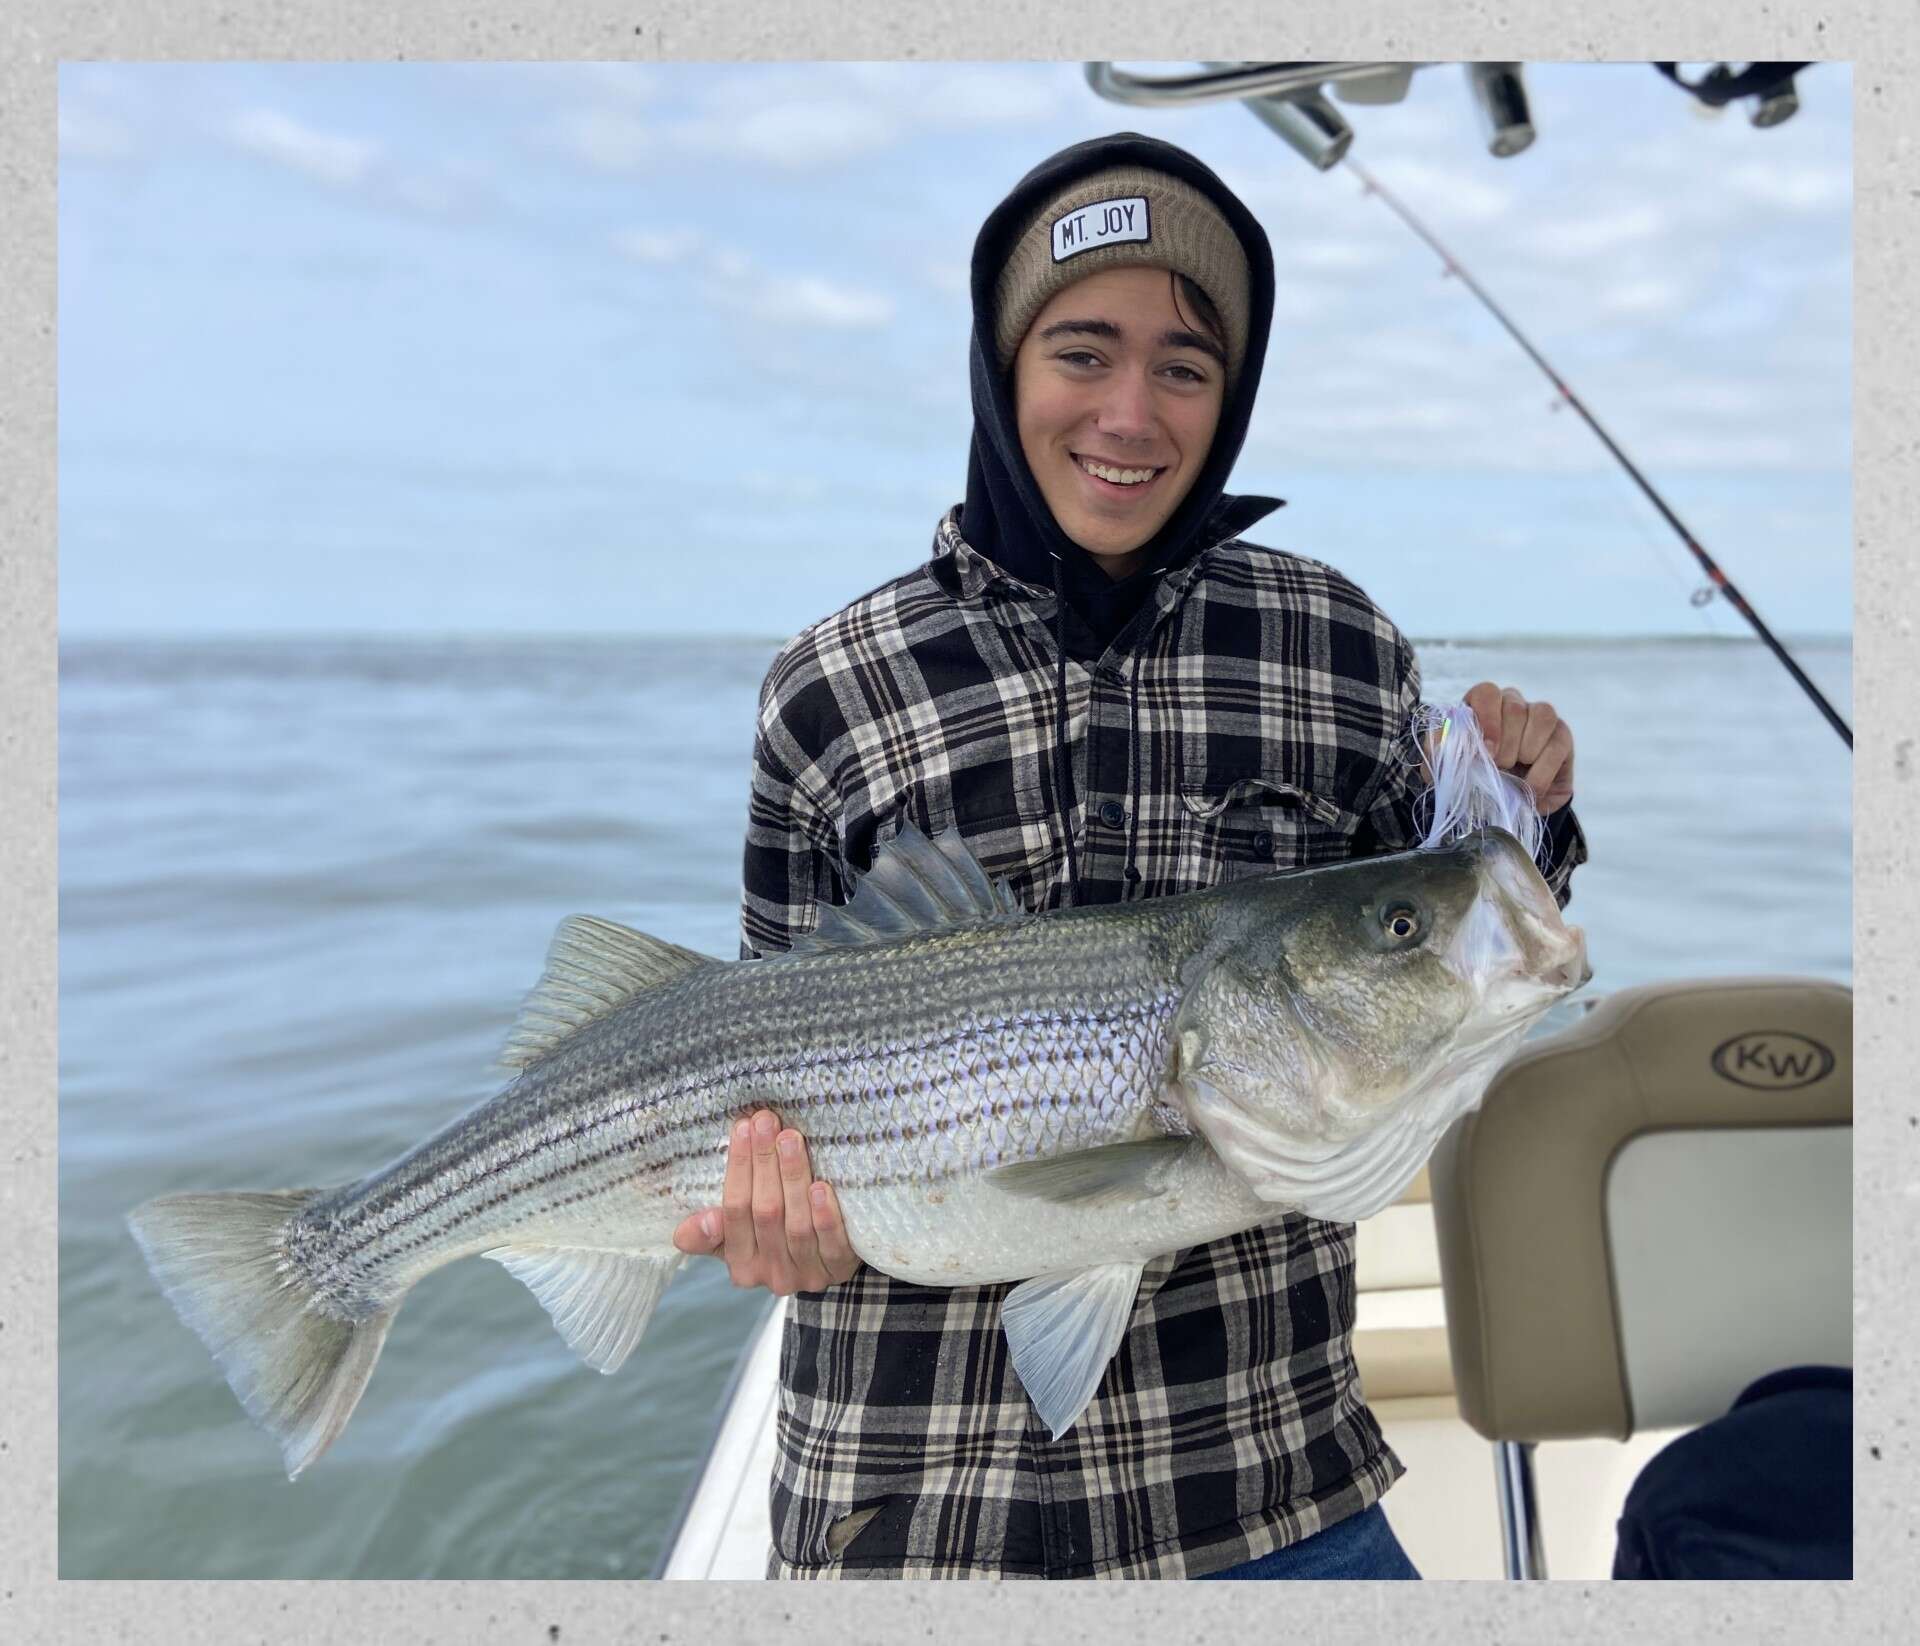 Western Sound: Baiting for Stripers - The Fisherman